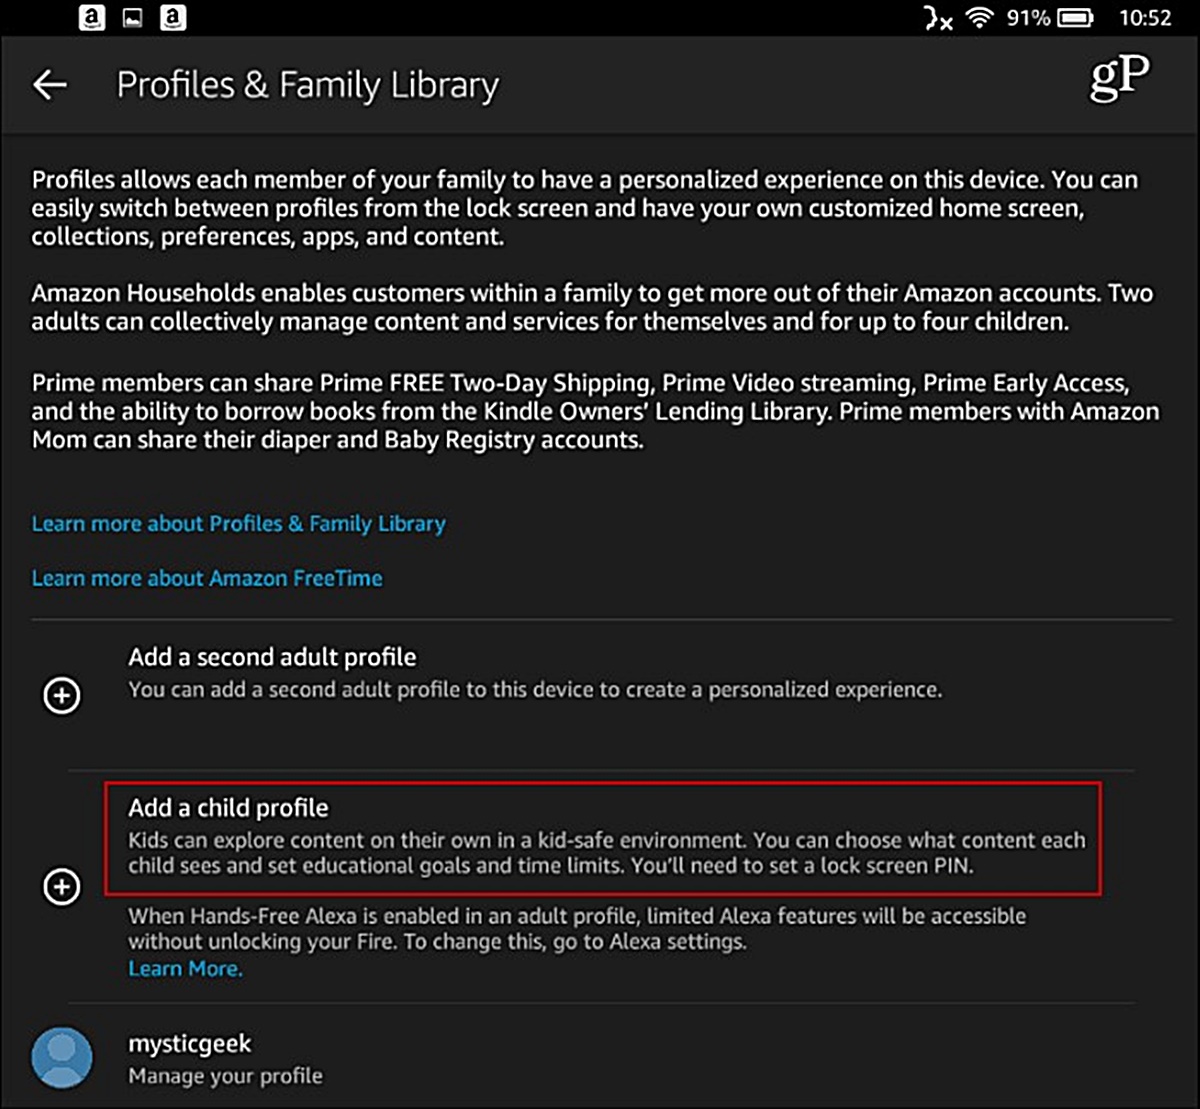 How To Add A Profile To An Amazon Fire Tablet